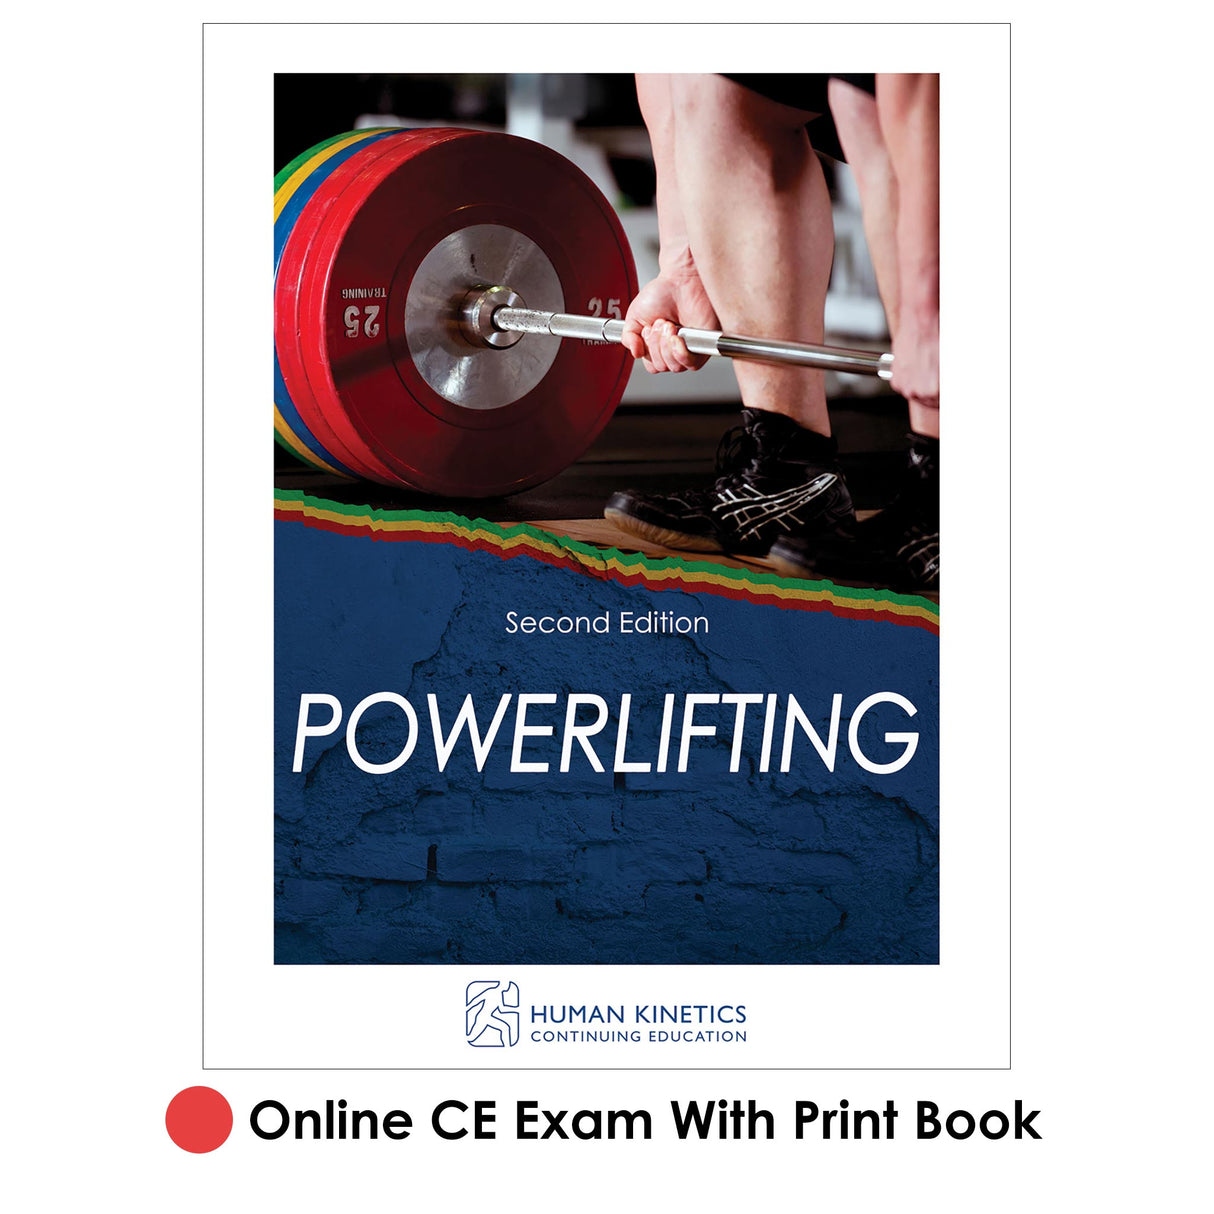 Powerlifting 2nd Edition Online CE Exam With Print Book